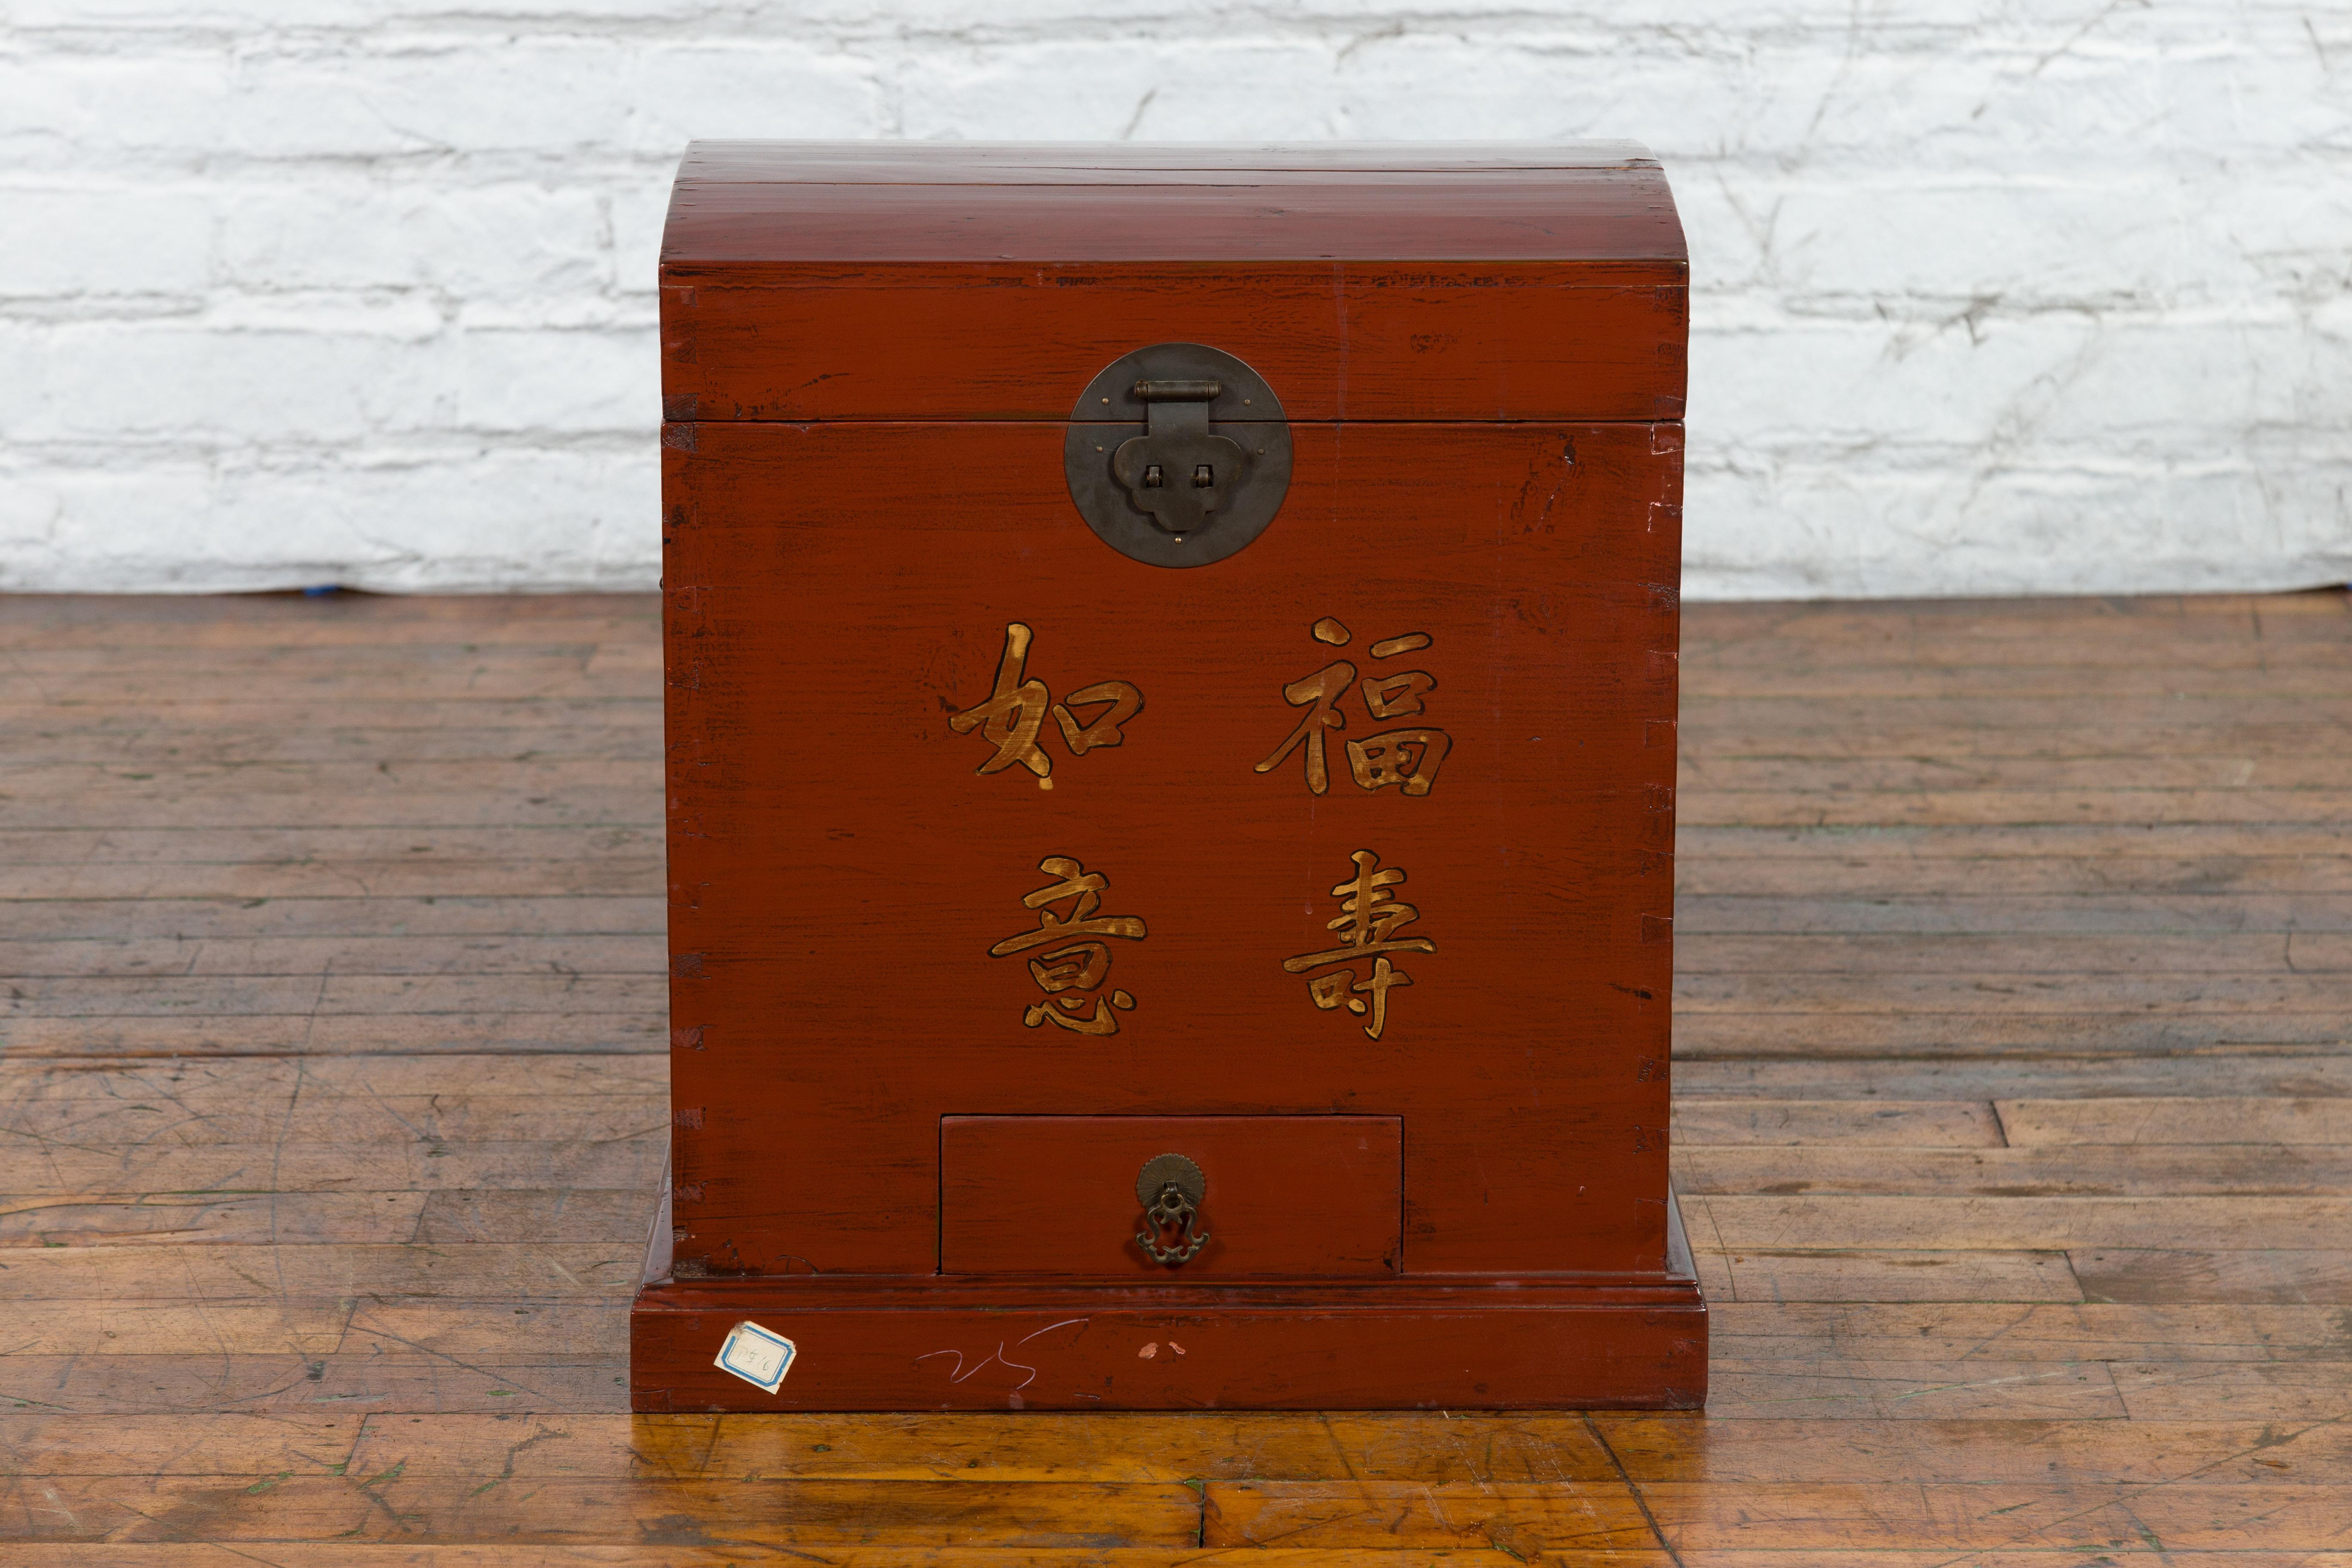 An antique Chinese Qing Dynasty period red lacquer treasure chest from the 19th century with gilded calligraphy, low drawer and brass hardware. Created in China during the Qing Dynasty period in the 19th century, this treasure chest showcases a red